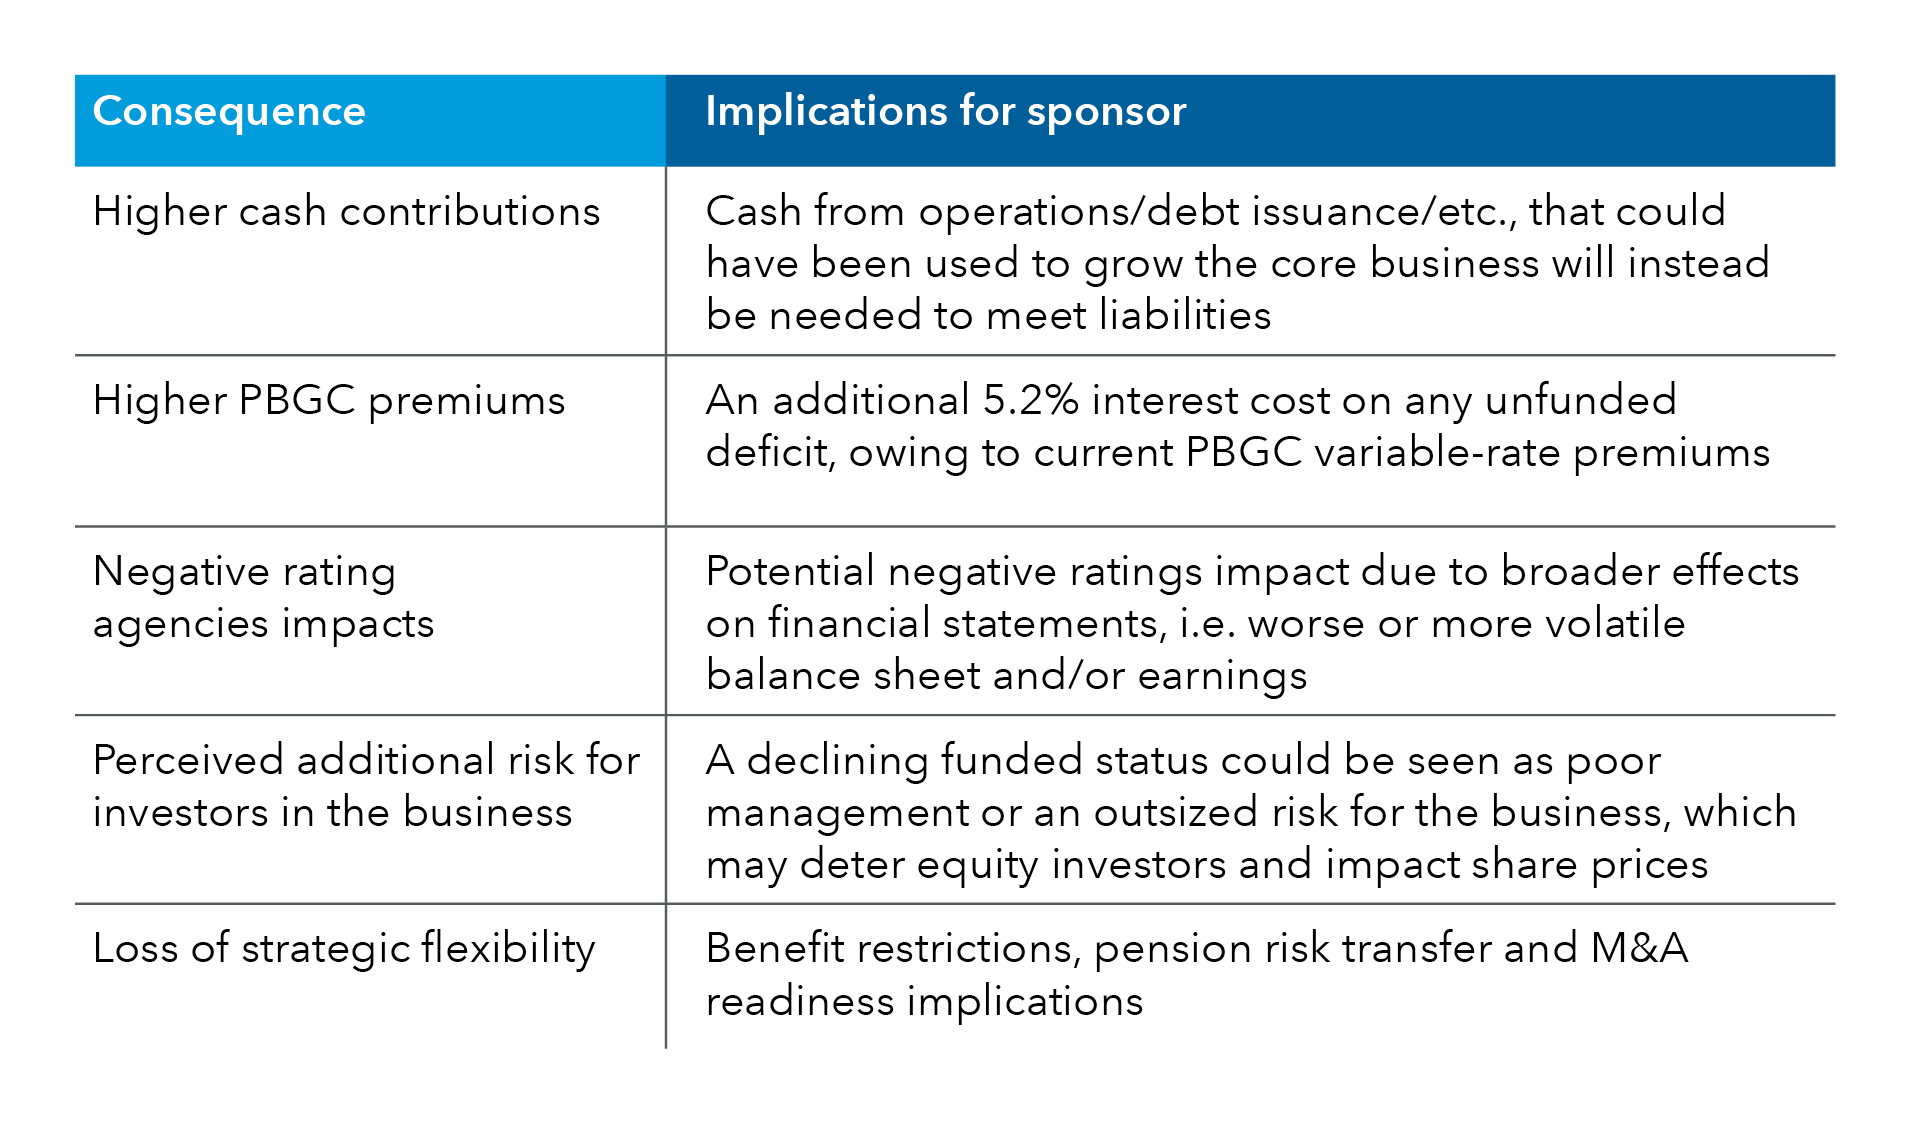 The graphic is a table highlighting some of the potential negative consequences of declining funded status for plans and the implications for plan sponsors, respectively.  1. Higher cash contributions: Cash from operations/debt issuance/etc., that could have been used to grow the core business will instead be needed to meet liabilities. 2. Higher PBGC premiums: An additional 5.2% interest cost on any unfunded deficit, owing to current PBGC variable-rate premiums. 3. Negative rating agencies impacts: Potential negative ratings impact due to broader effects on financial statements, i.e. worse or more volatile balance sheet and/or earnings. 4. Perceived additional risk for investors in the business: A declining funded status could be seen as poor management or an outsized risk for the business, which may deter equity investors and impact share prices. 5. Loss of strategic flexibility: Benefit restrictions, pension risk transfer, and M&A readiness implications.